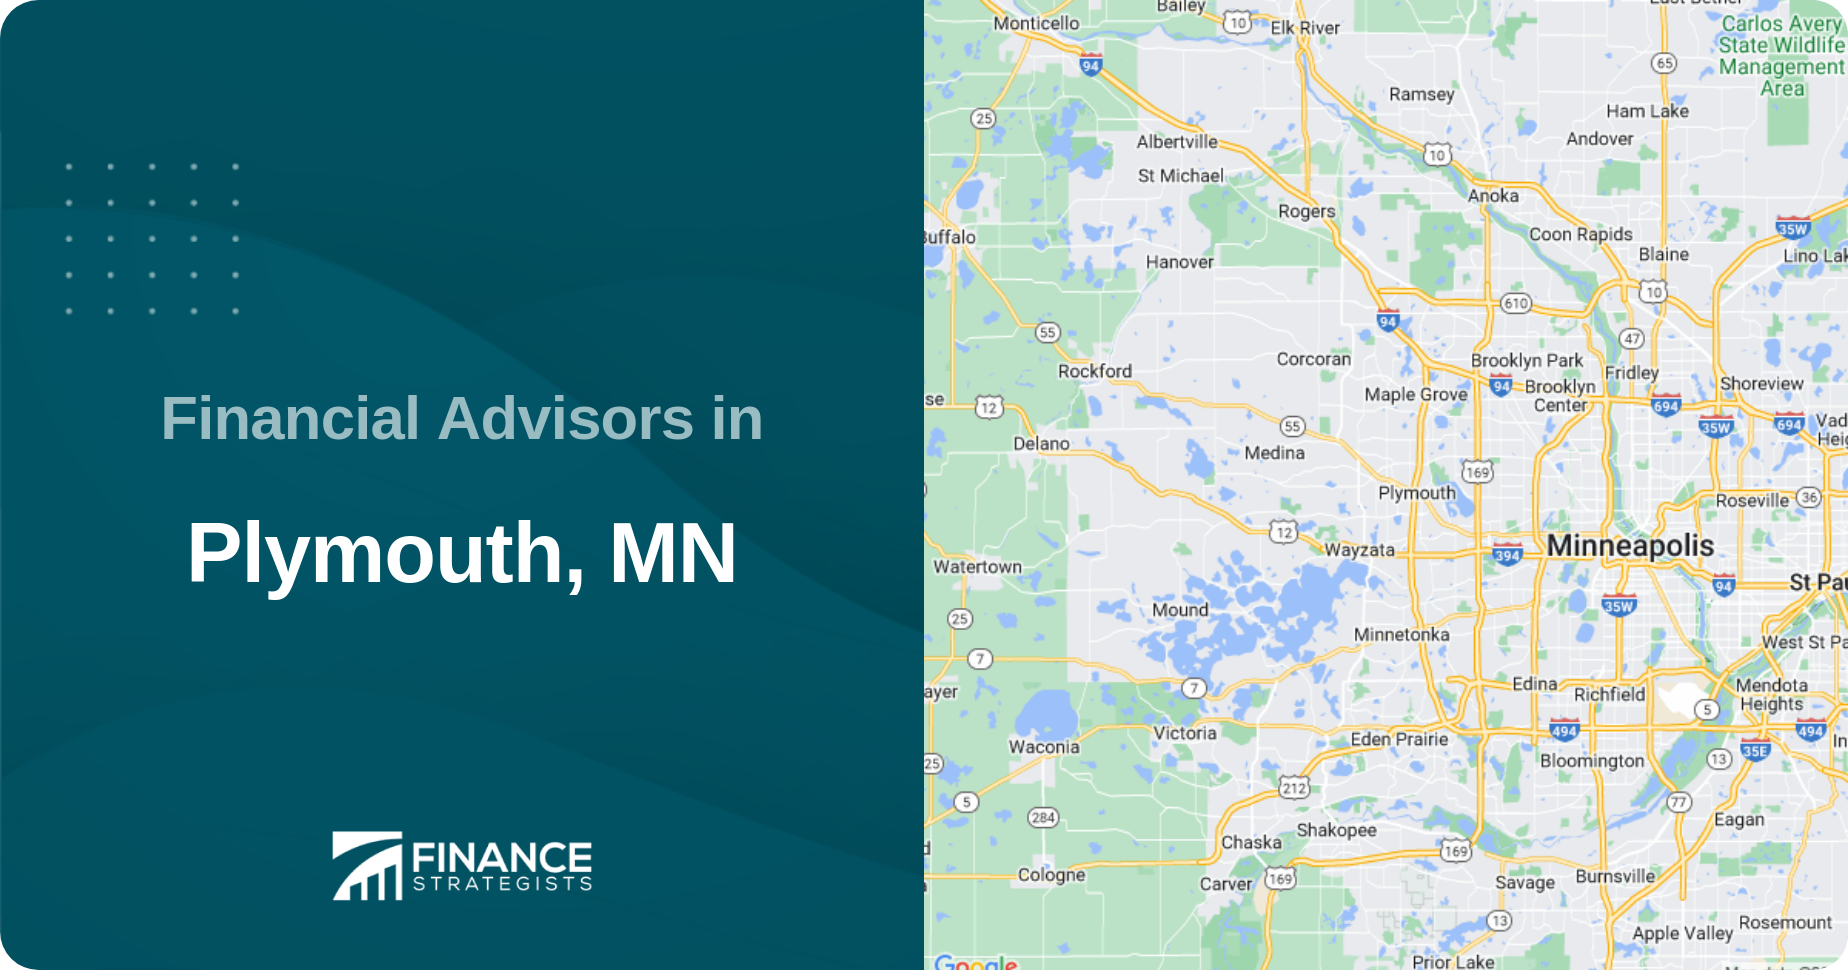 Financial Advisors in Plymouth, MN